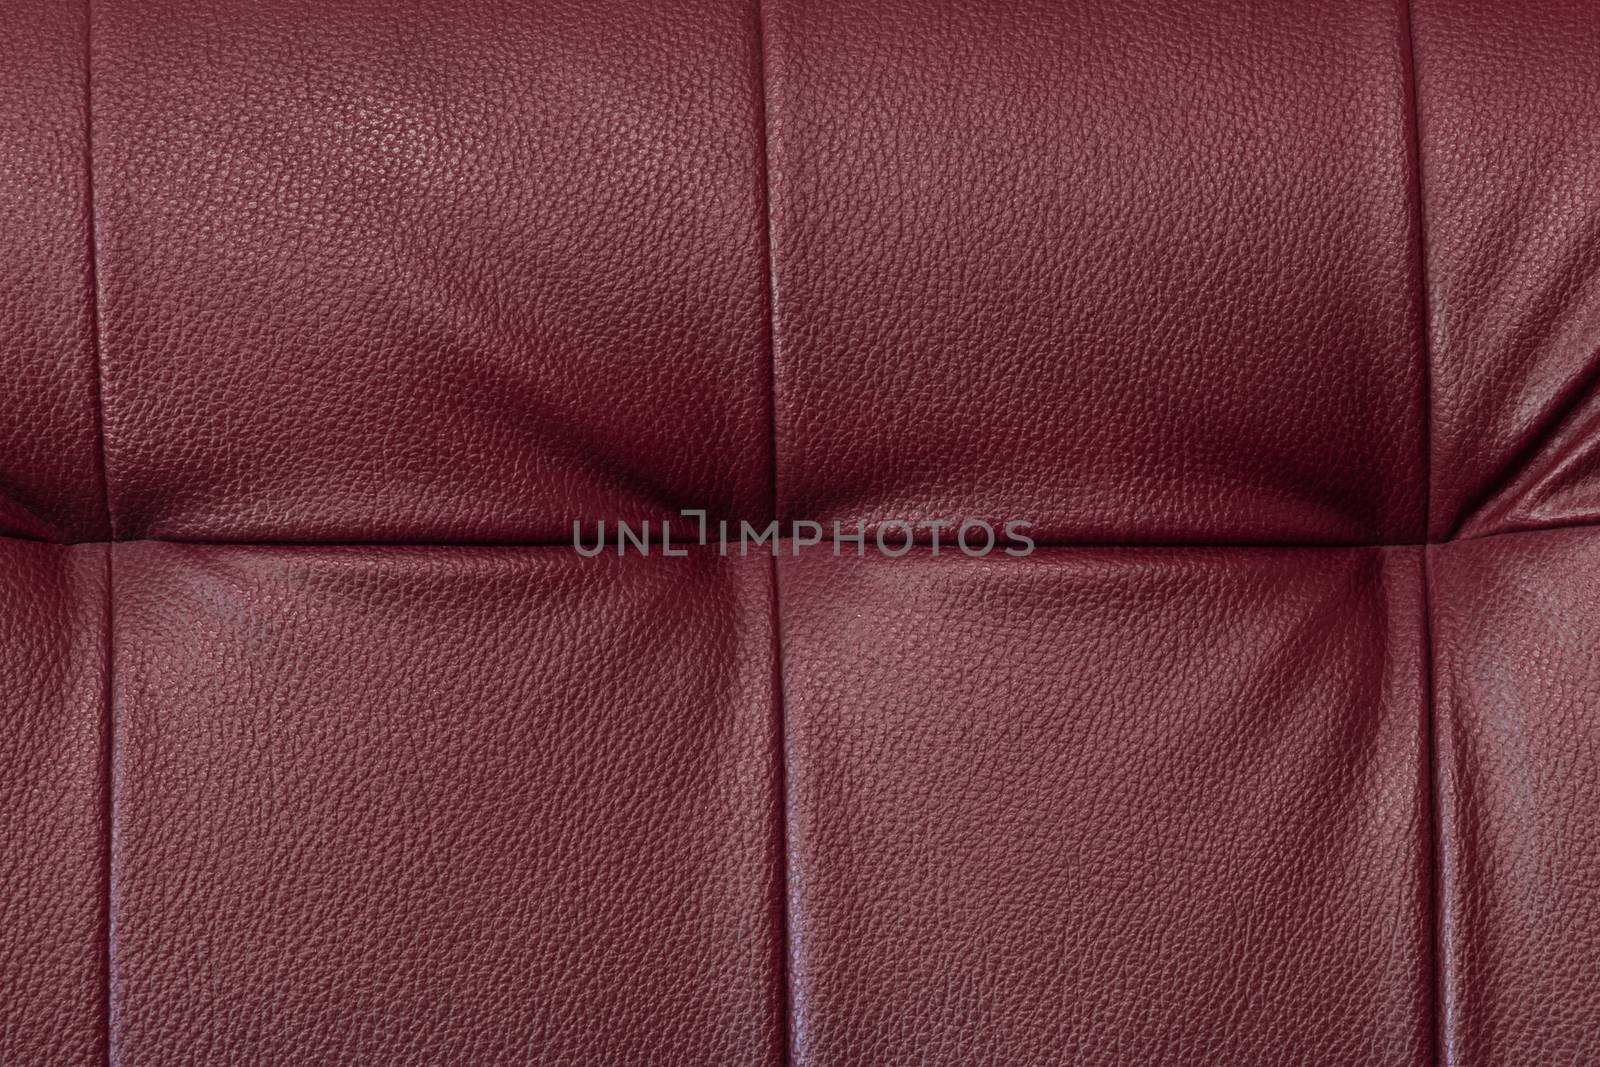 Texture of chili red leather furniture